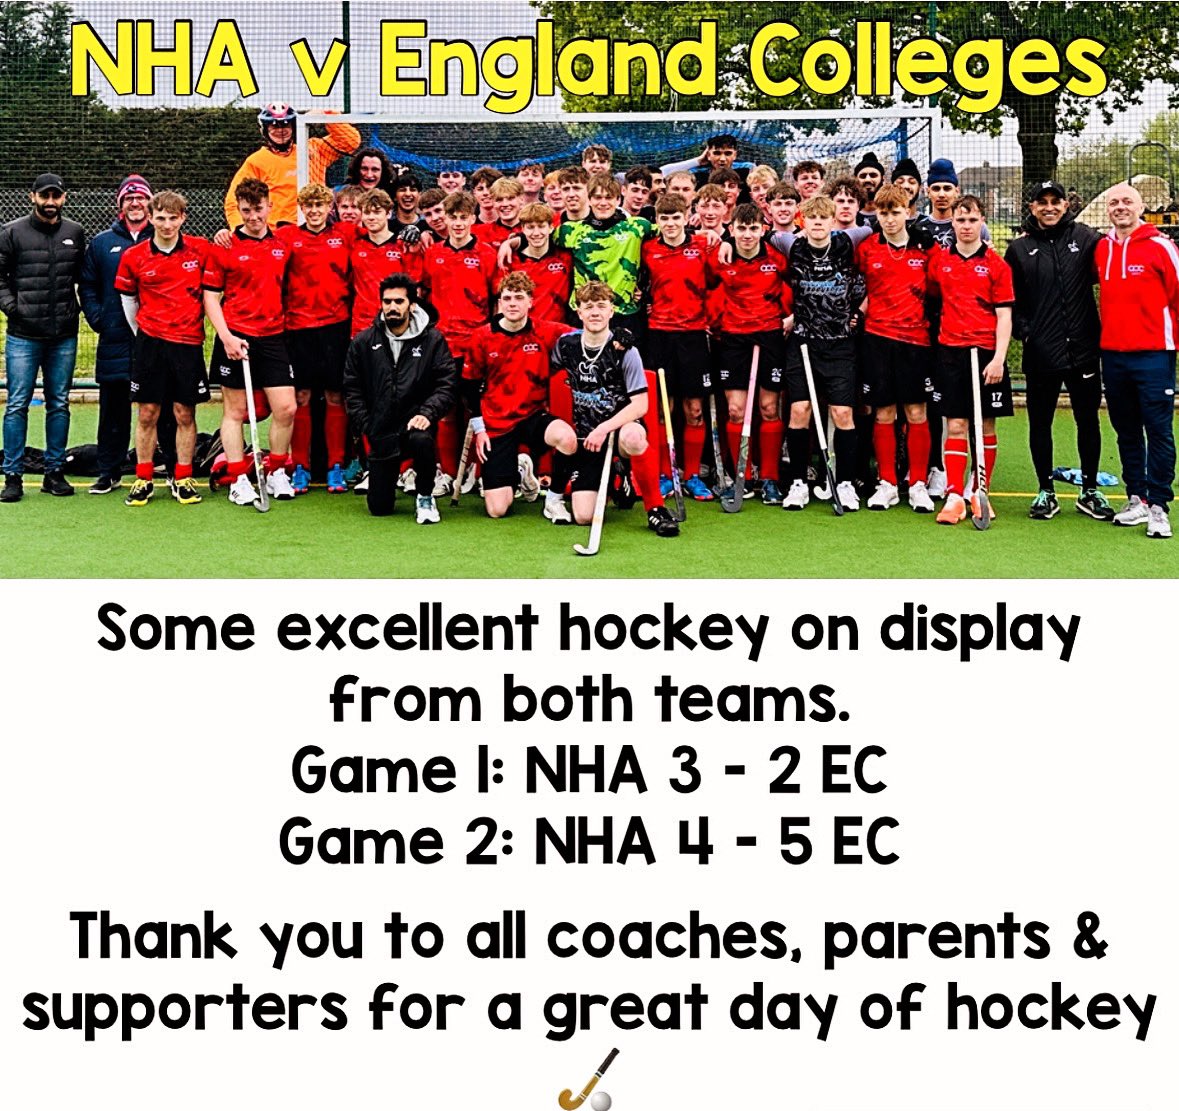 Great day of hockey playing against the England Colleges. Some excellent hockey on display from both teams. Thank you to all the coaches & umpires! Well played all ! 👏👏👏👏

@EHBirminghamTA @EnglandHockey @EHMidlands 

#creatingopportunity #celebratinghardwork
#hockeyfamily